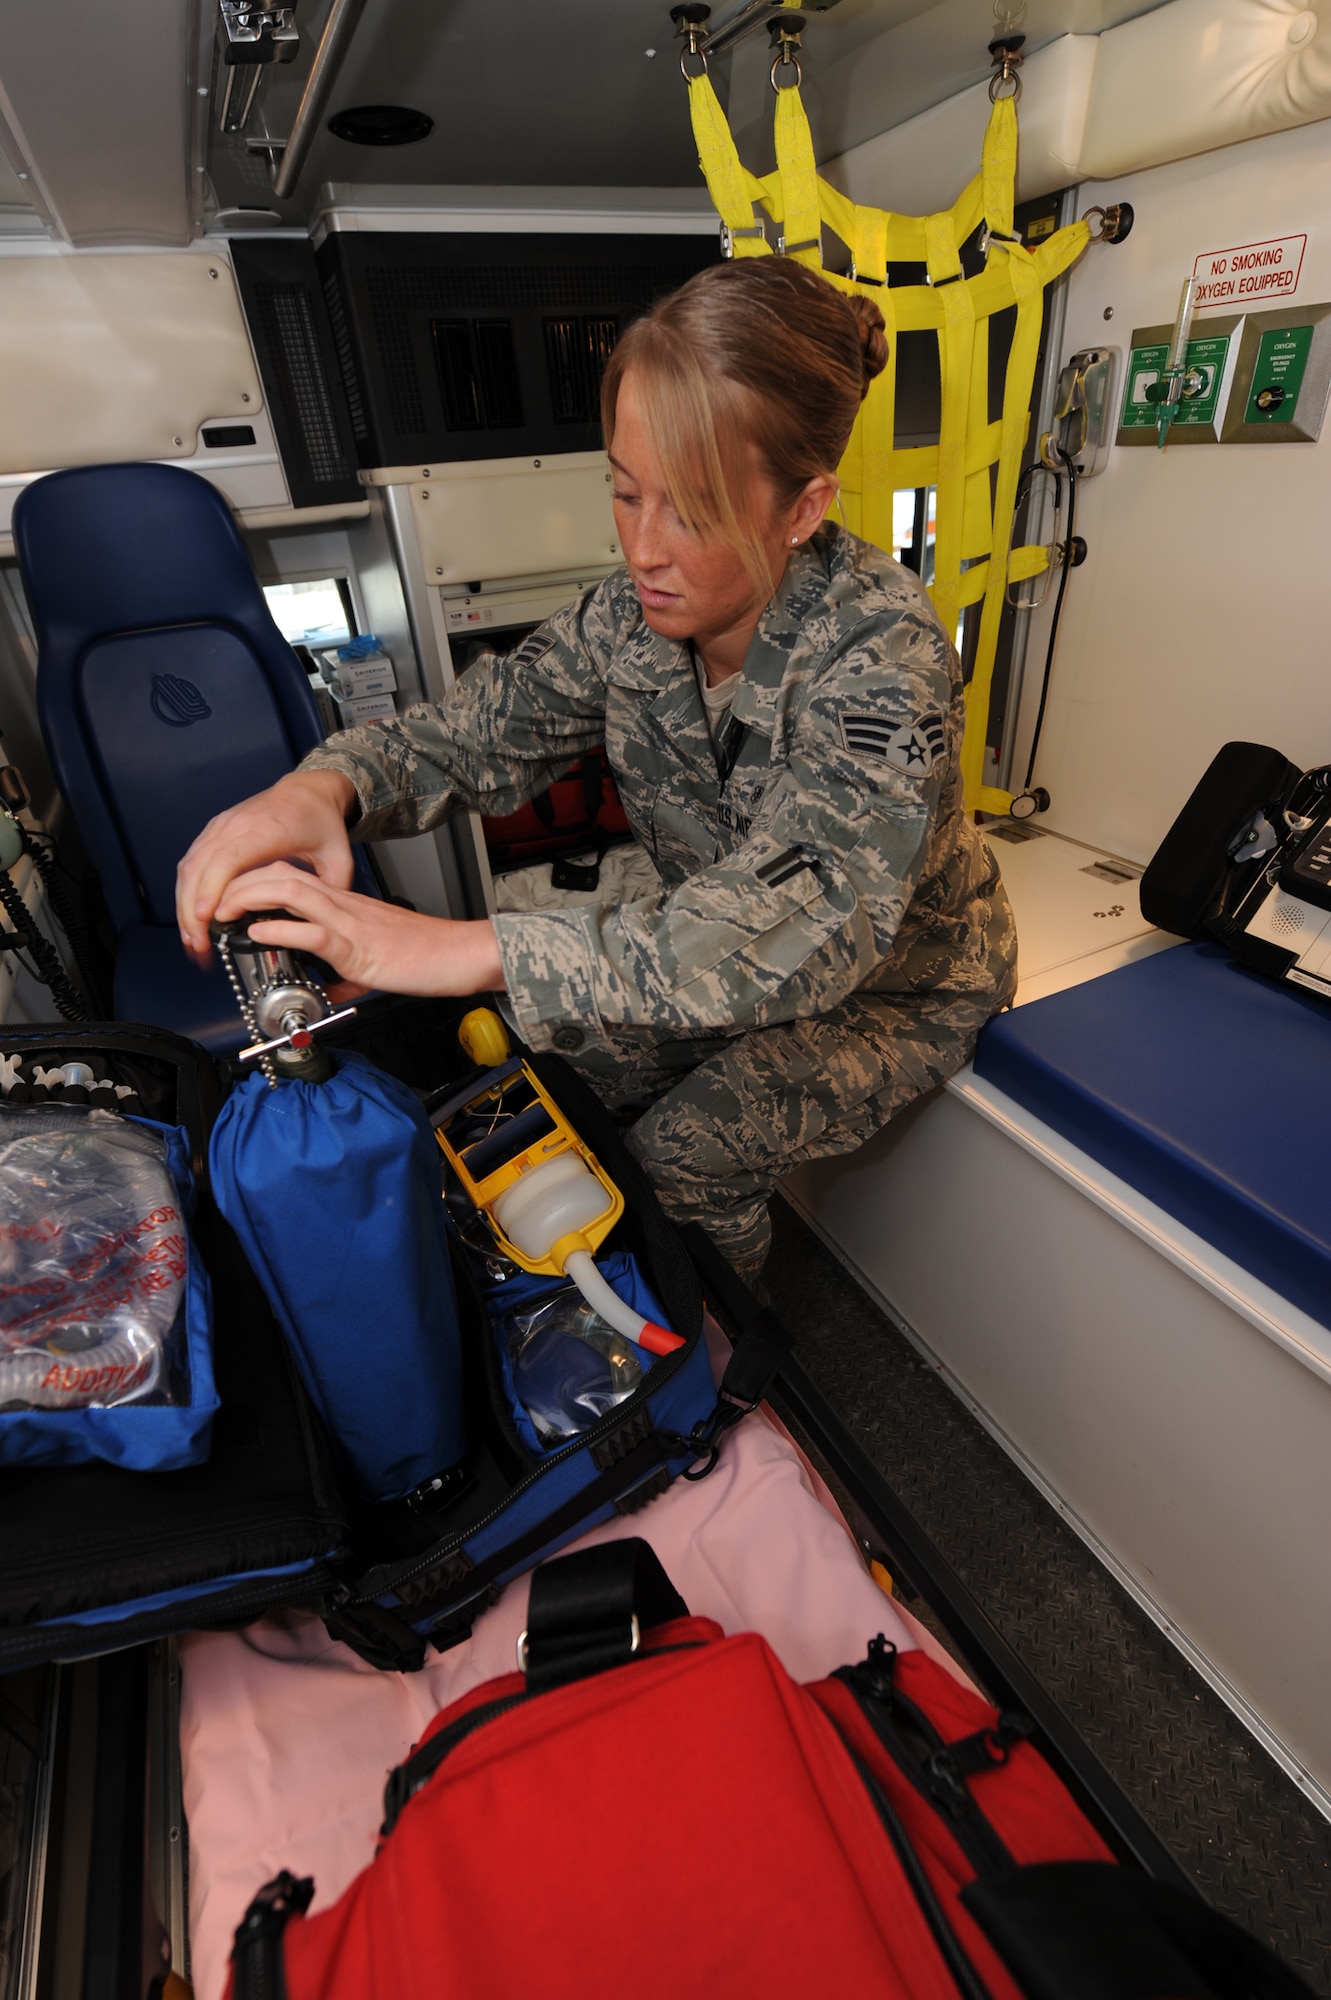 WHITEMAN AIR FORCE BASE, Mo. - Senior Airman Melissa Lerch, 509th Medical Operations Squadron, aerospace medical technician, inspects oxygen bottle levels at the beginning of her shift, Feb. 23. Ambulance Services are on-call 24 hours a day, ready to respond to anything from an emergency landing on the airfield, to a sprained ankle at the fitness center. (U.S. Air Force photo/ Airman 1st Class Carlin Leslie)

